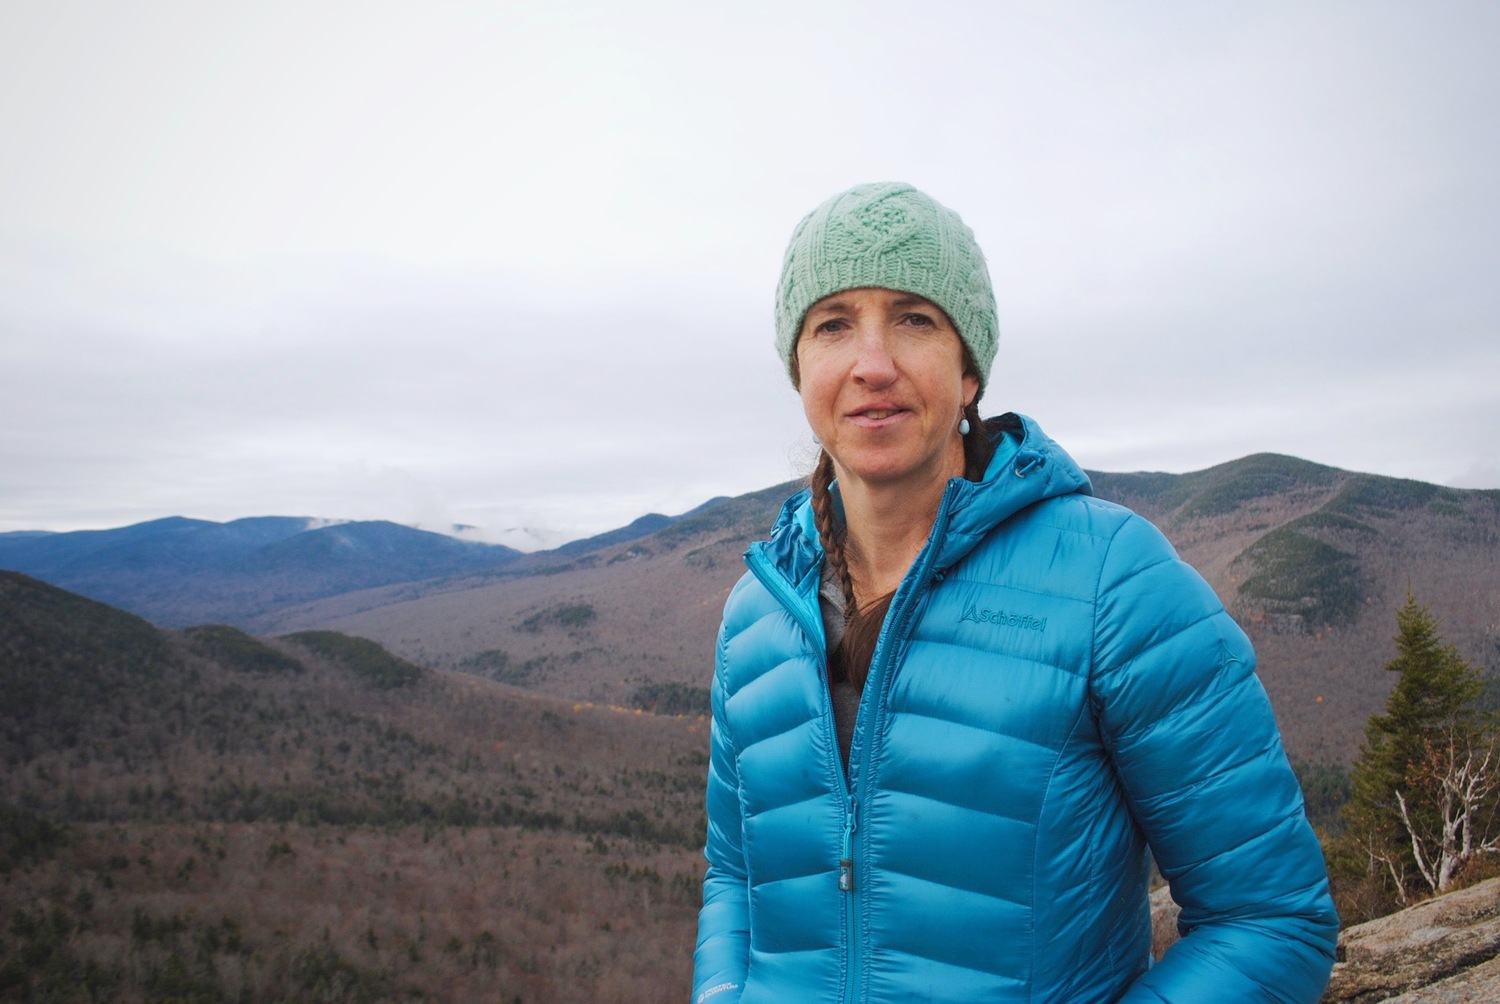 a portrait of a woman in a blue jacket in the mountains